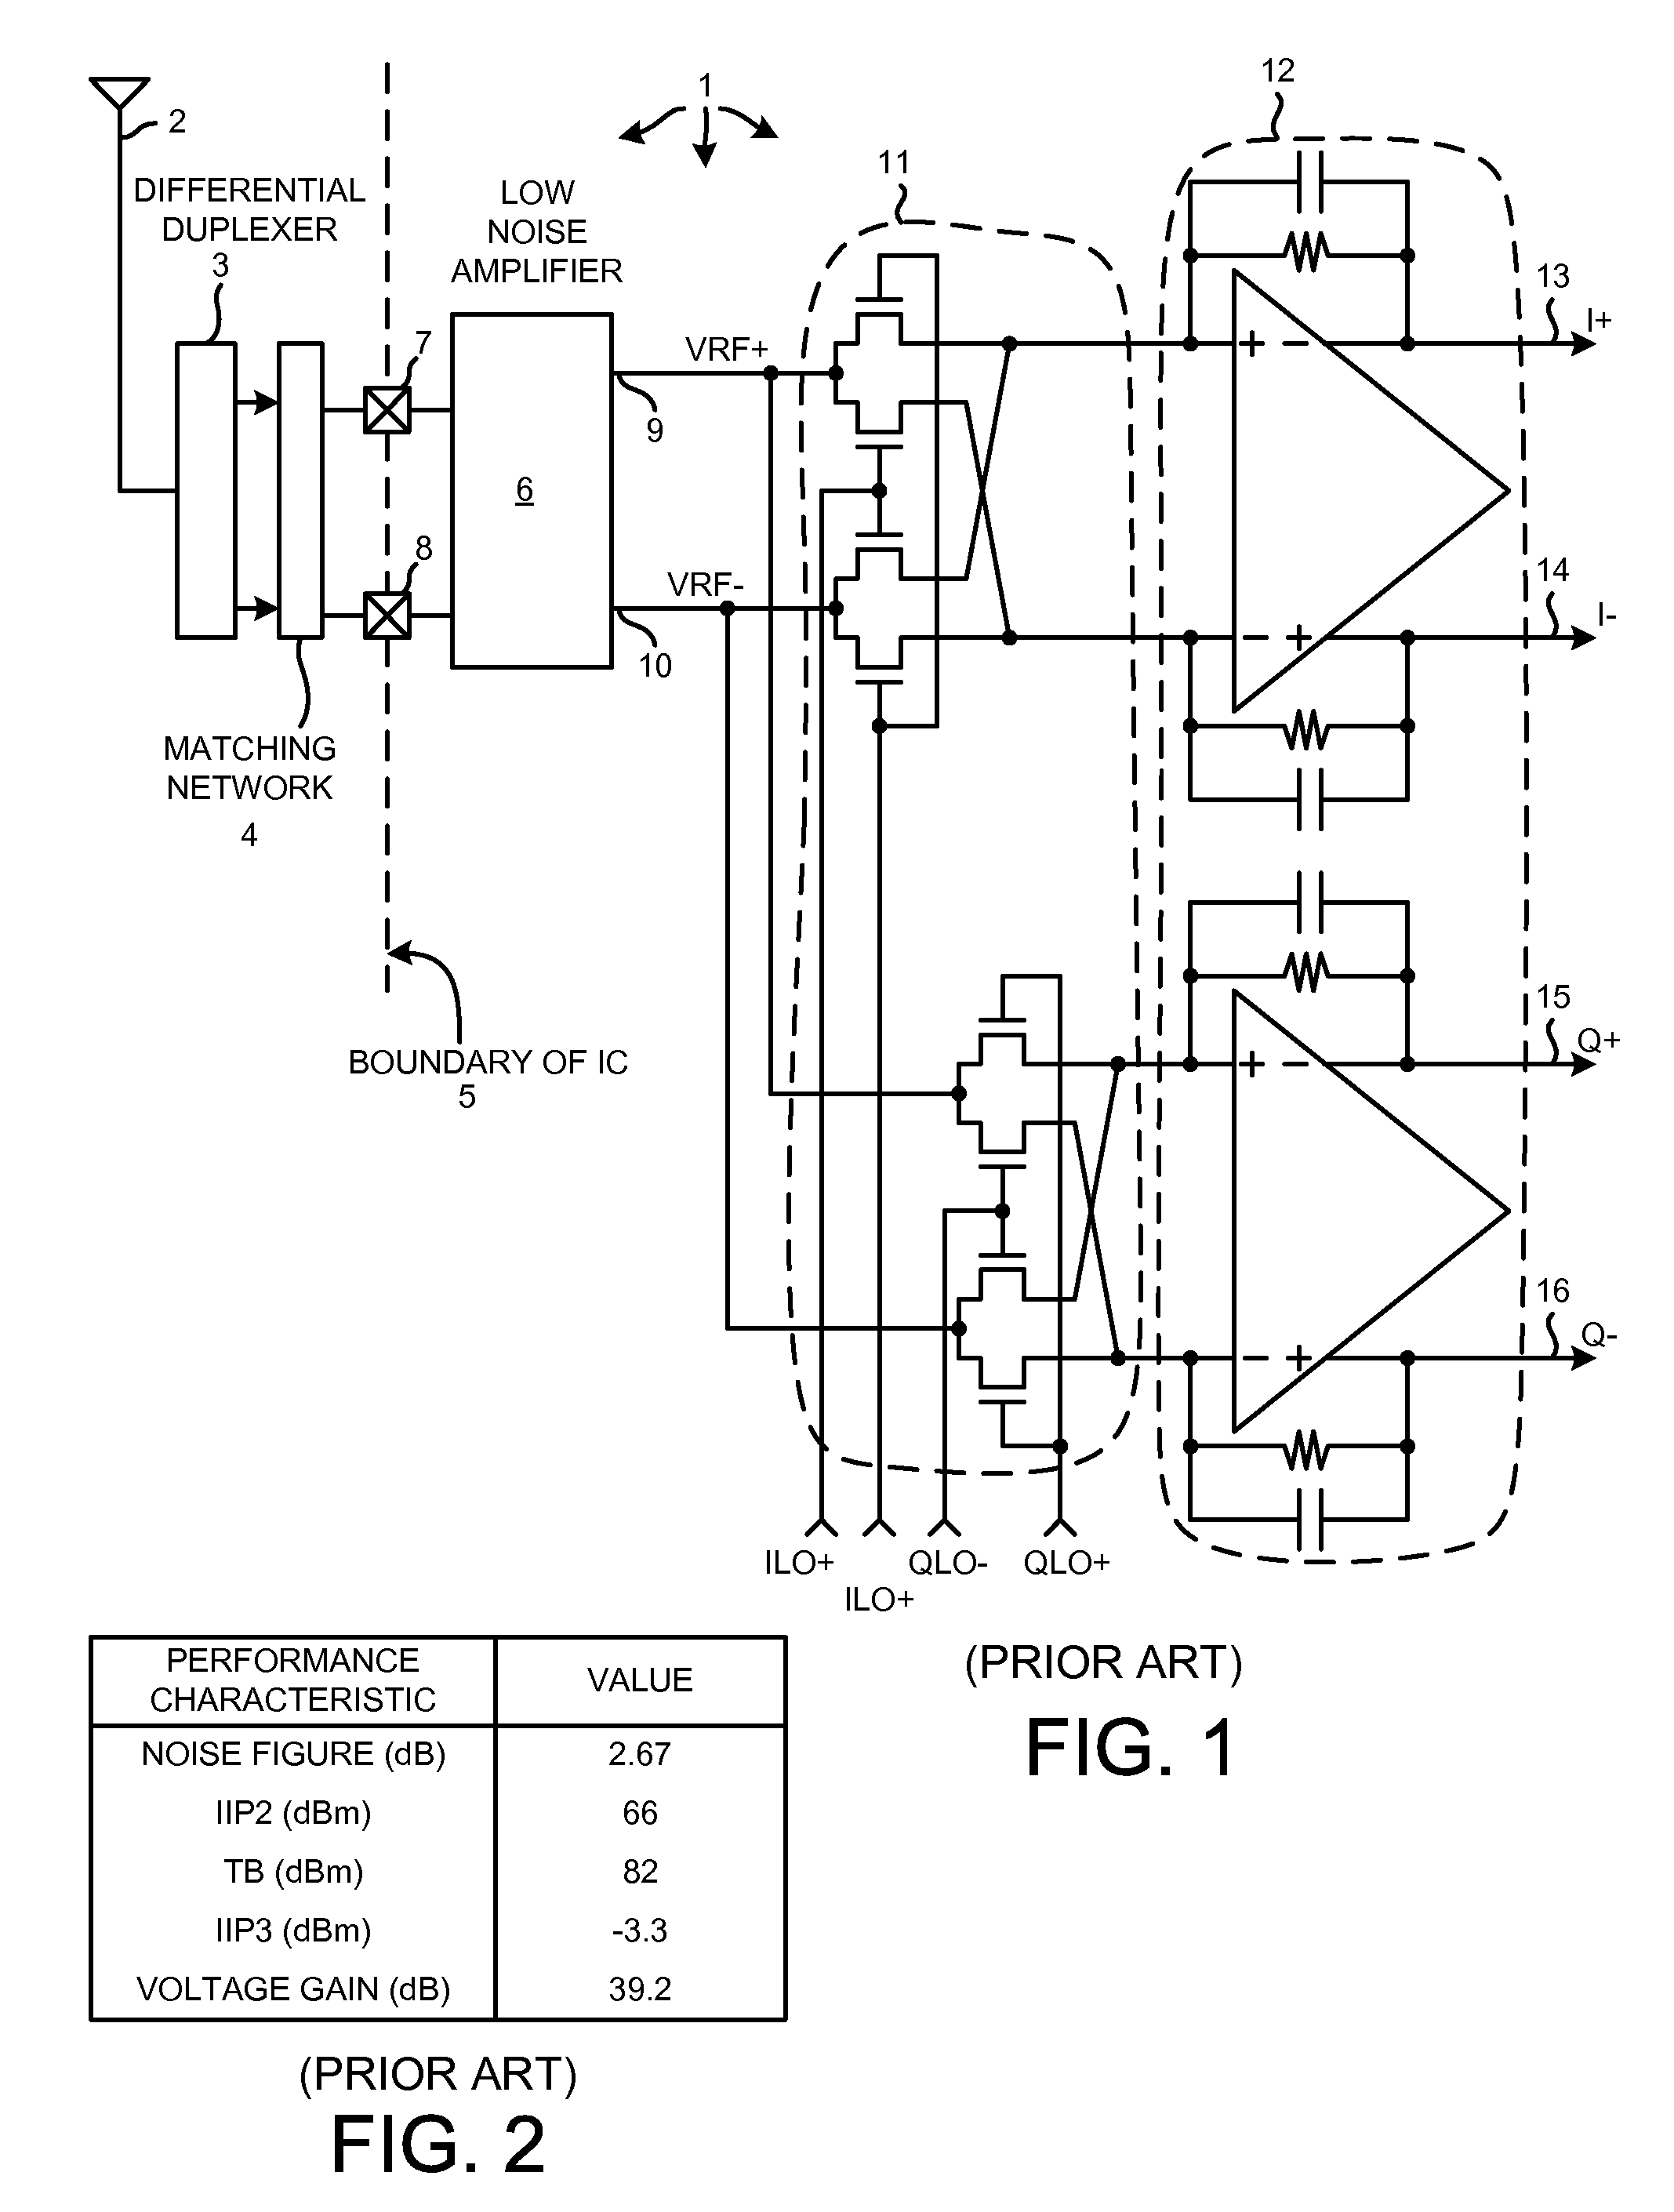 Degenerated passive mixer in saw-less receiver